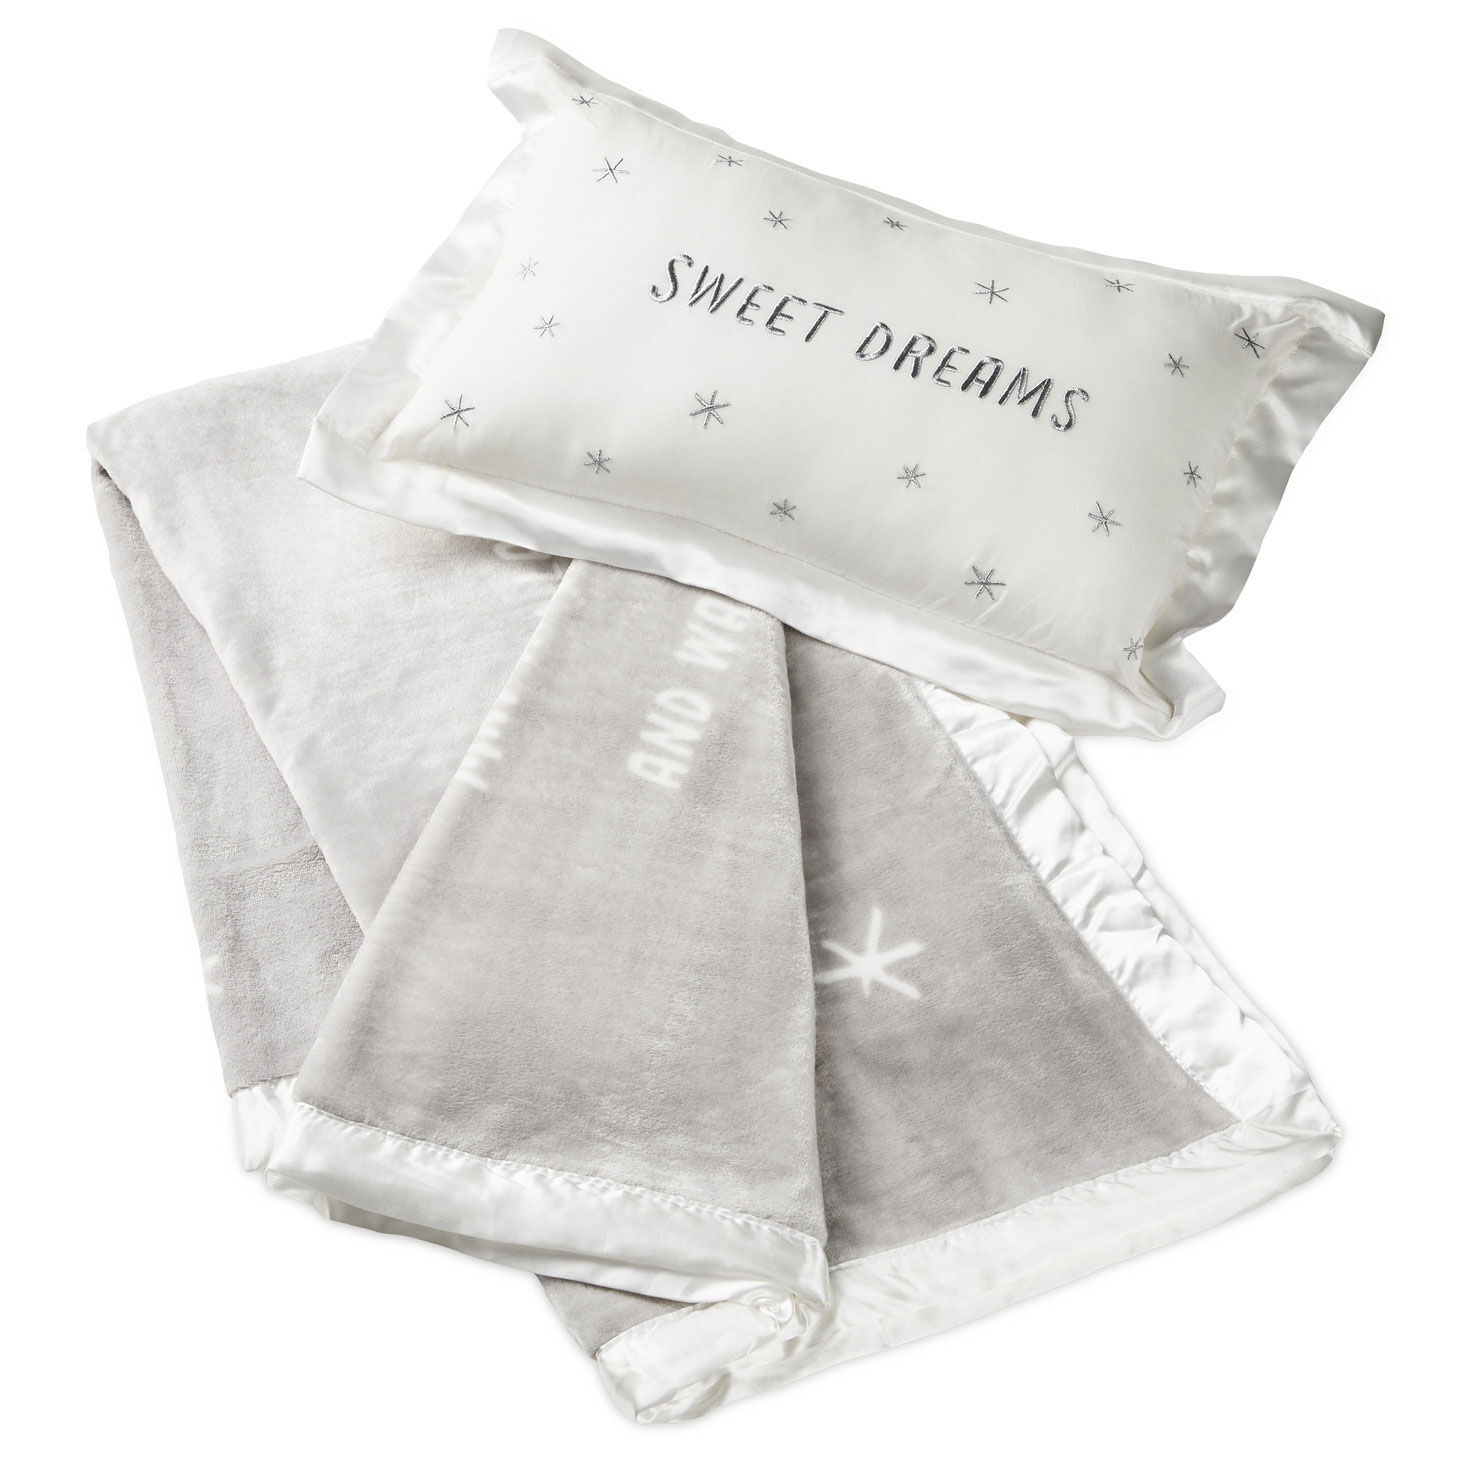 Nighttime Prayer Pillow and Blanket Set for only USD 49.99 | Hallmark